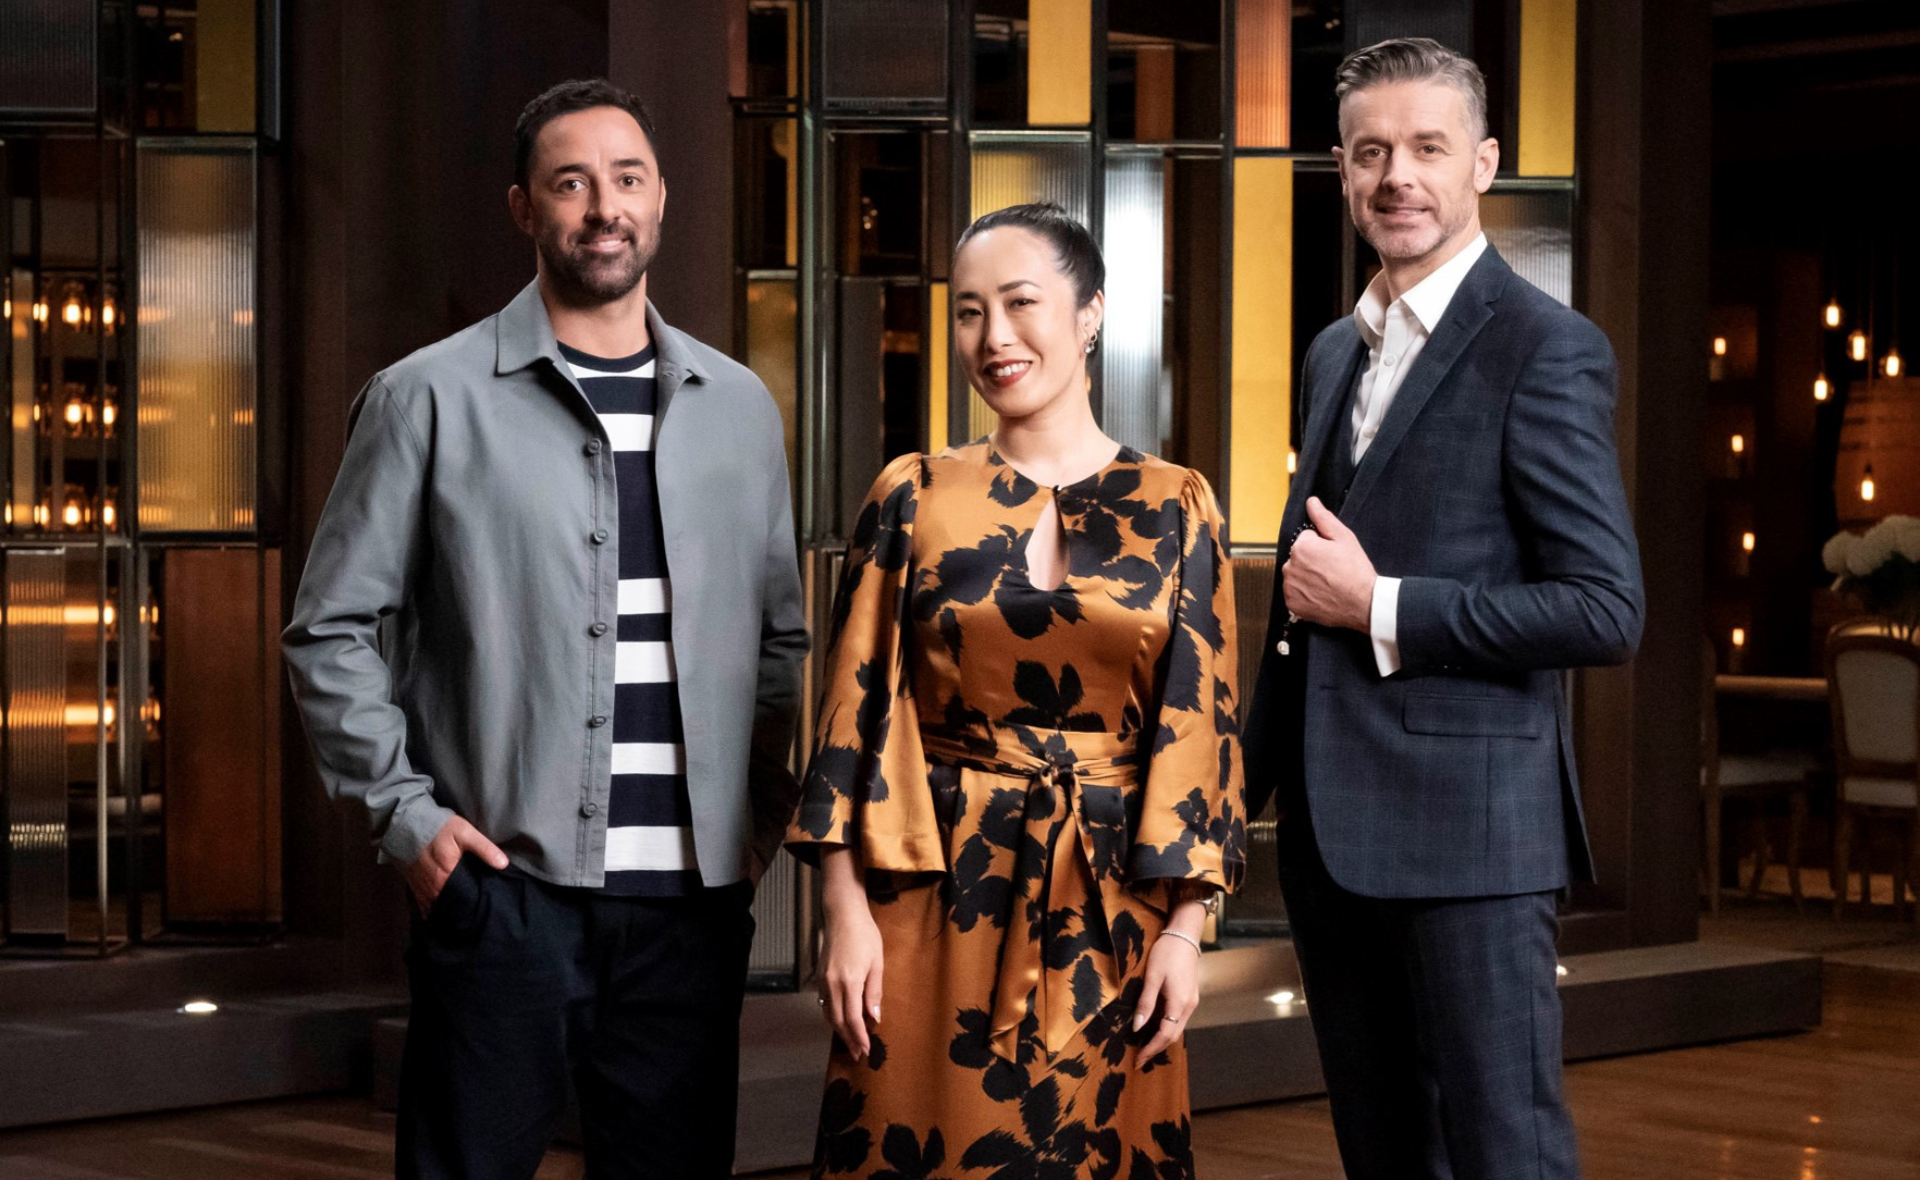 Who can withstand the heat in the kitchen and win MasterChef Australia 2023?